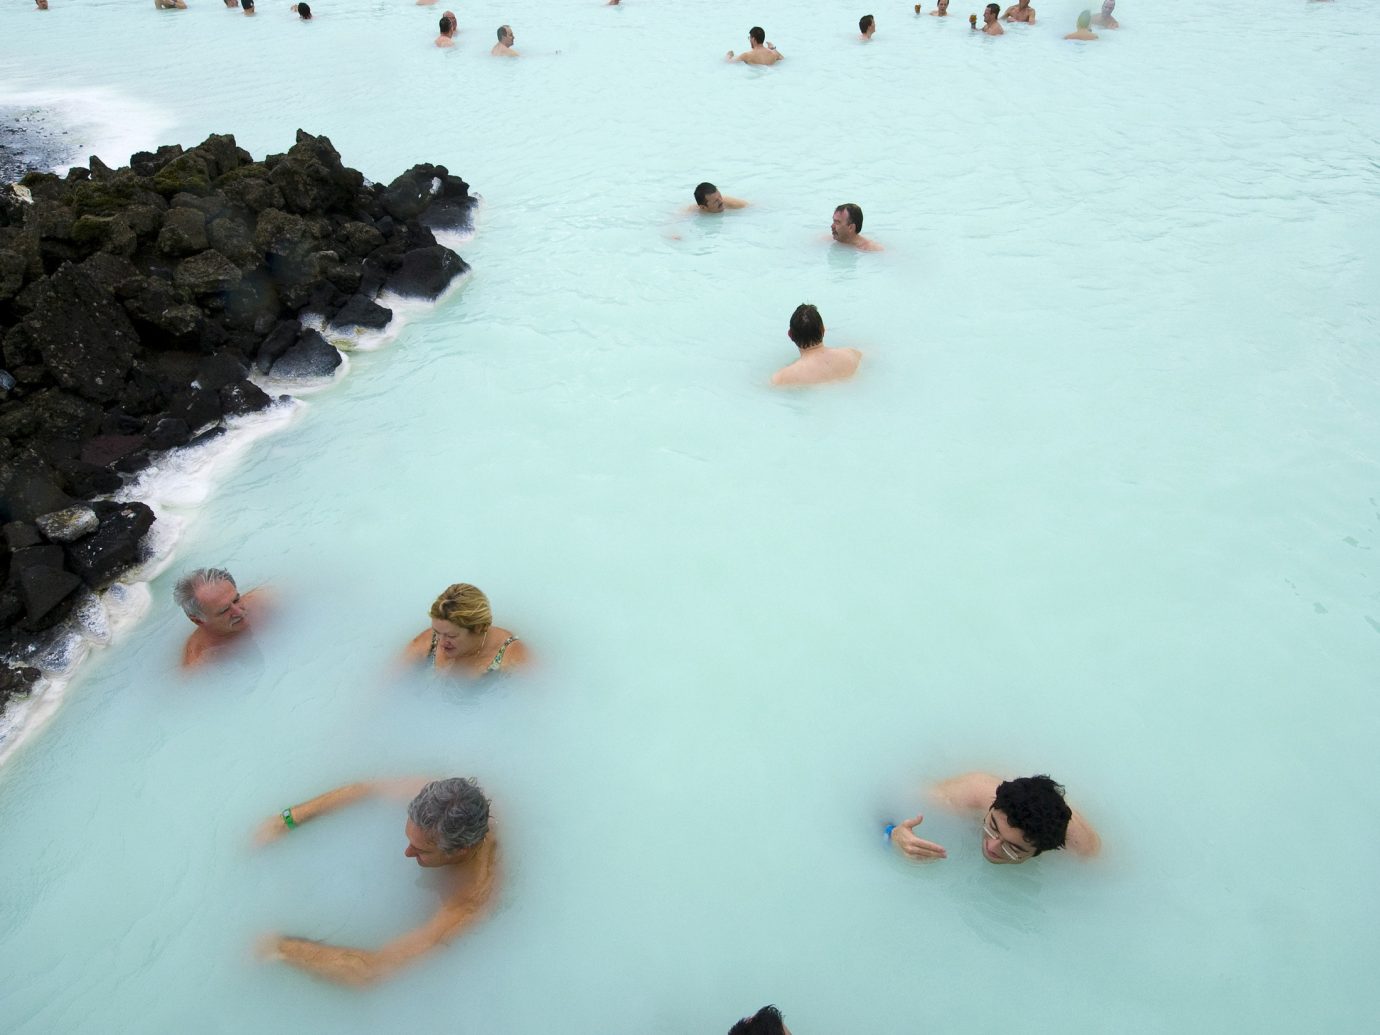 Hotels Iceland Trip Ideas sky water Beach body of water Winter weather snow reflection Sea sand season Nature material